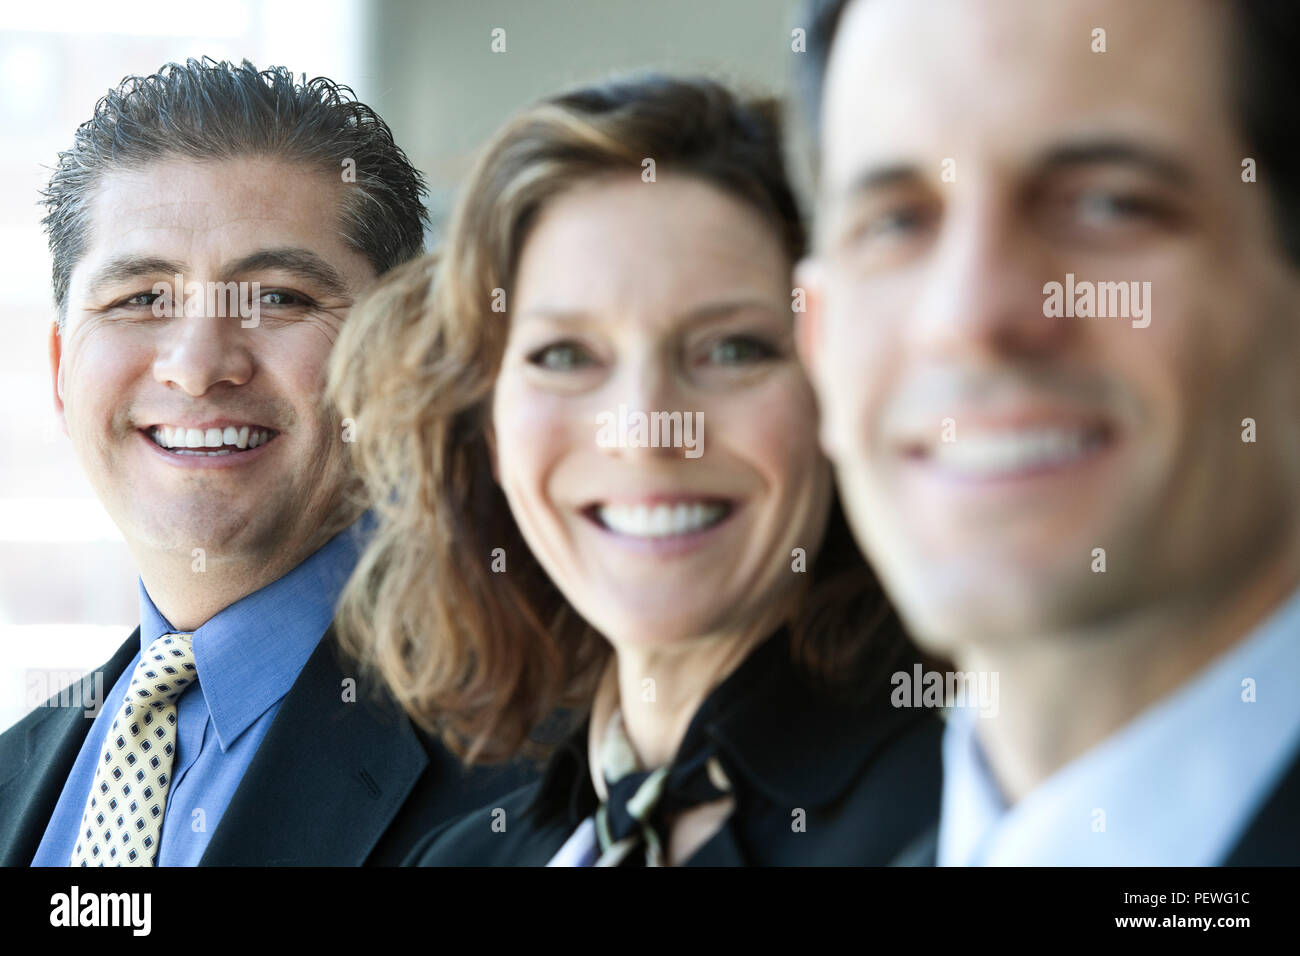 A closeup portrait of a row of multi ethnic business people, with focus on the hispanic businessman. Stock Photo